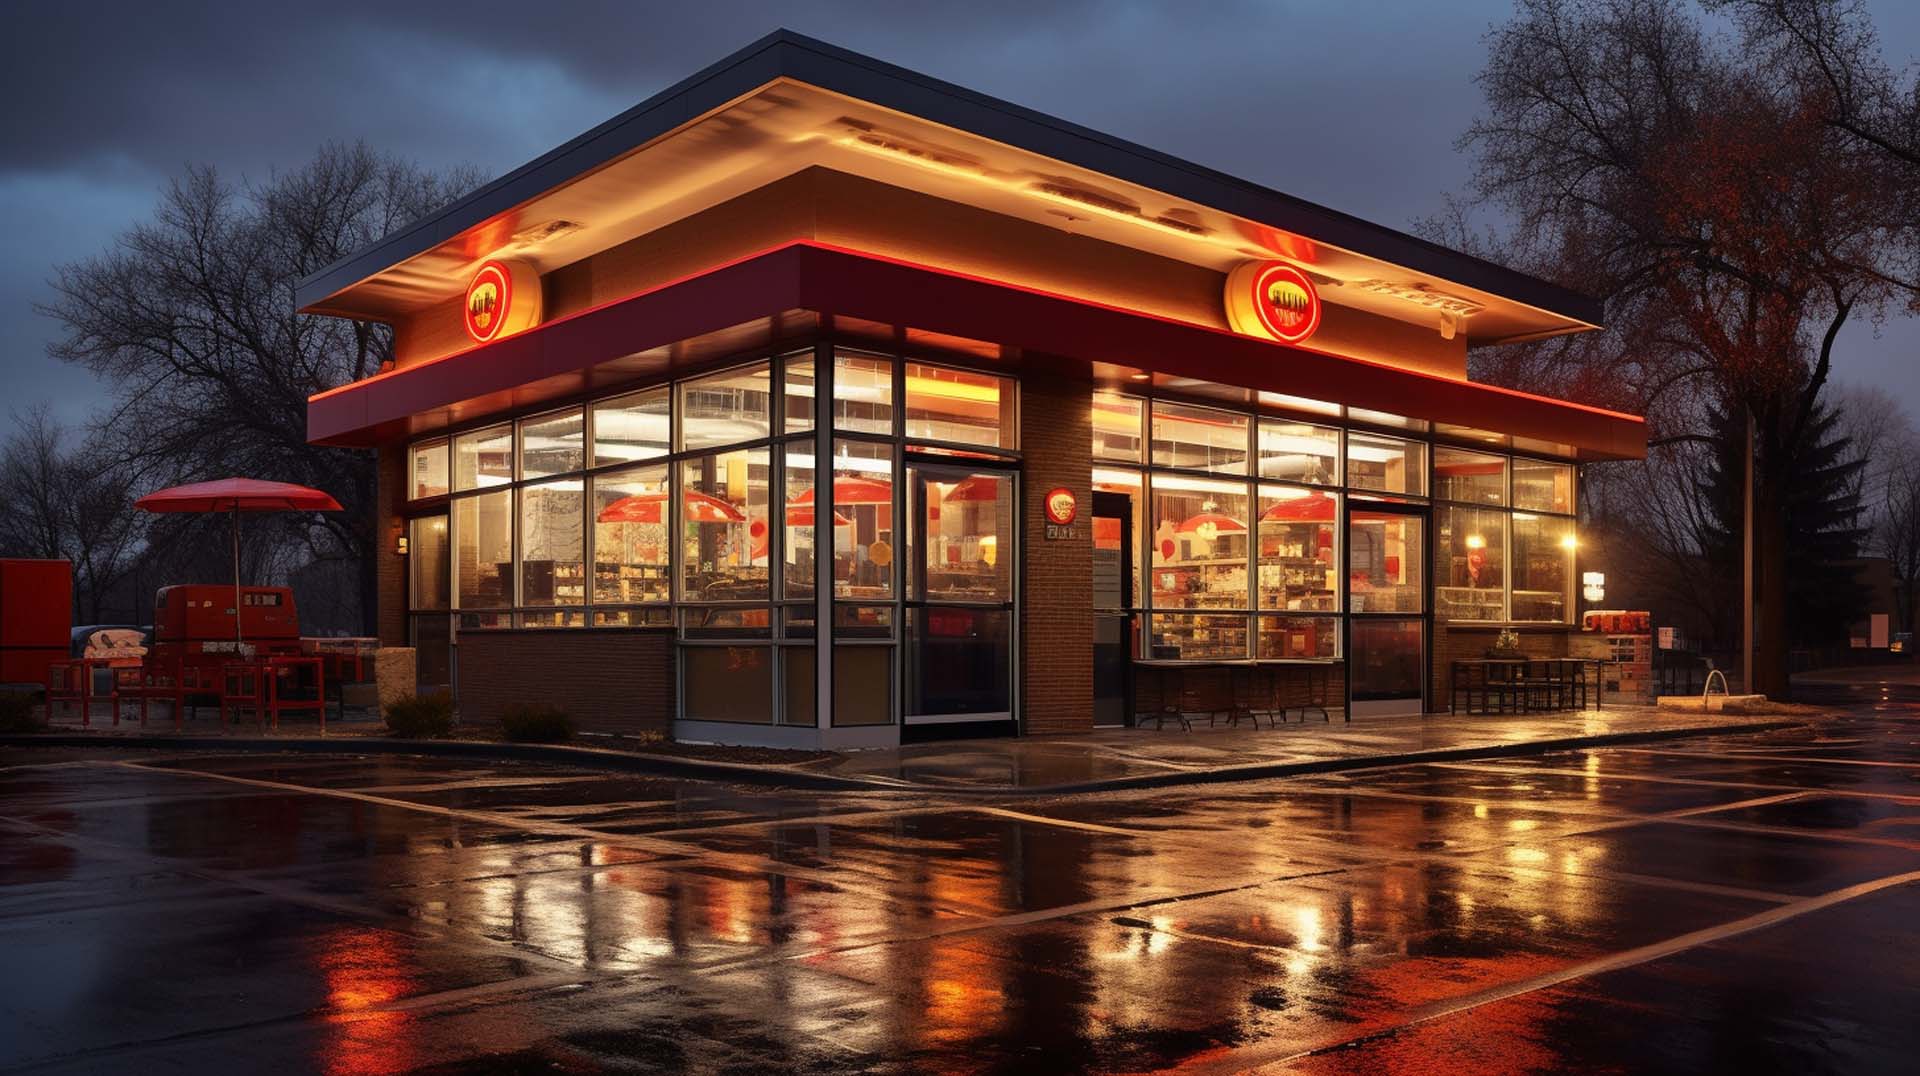 Costa Mesa has a wide variety of delicious fast food options to choose from.